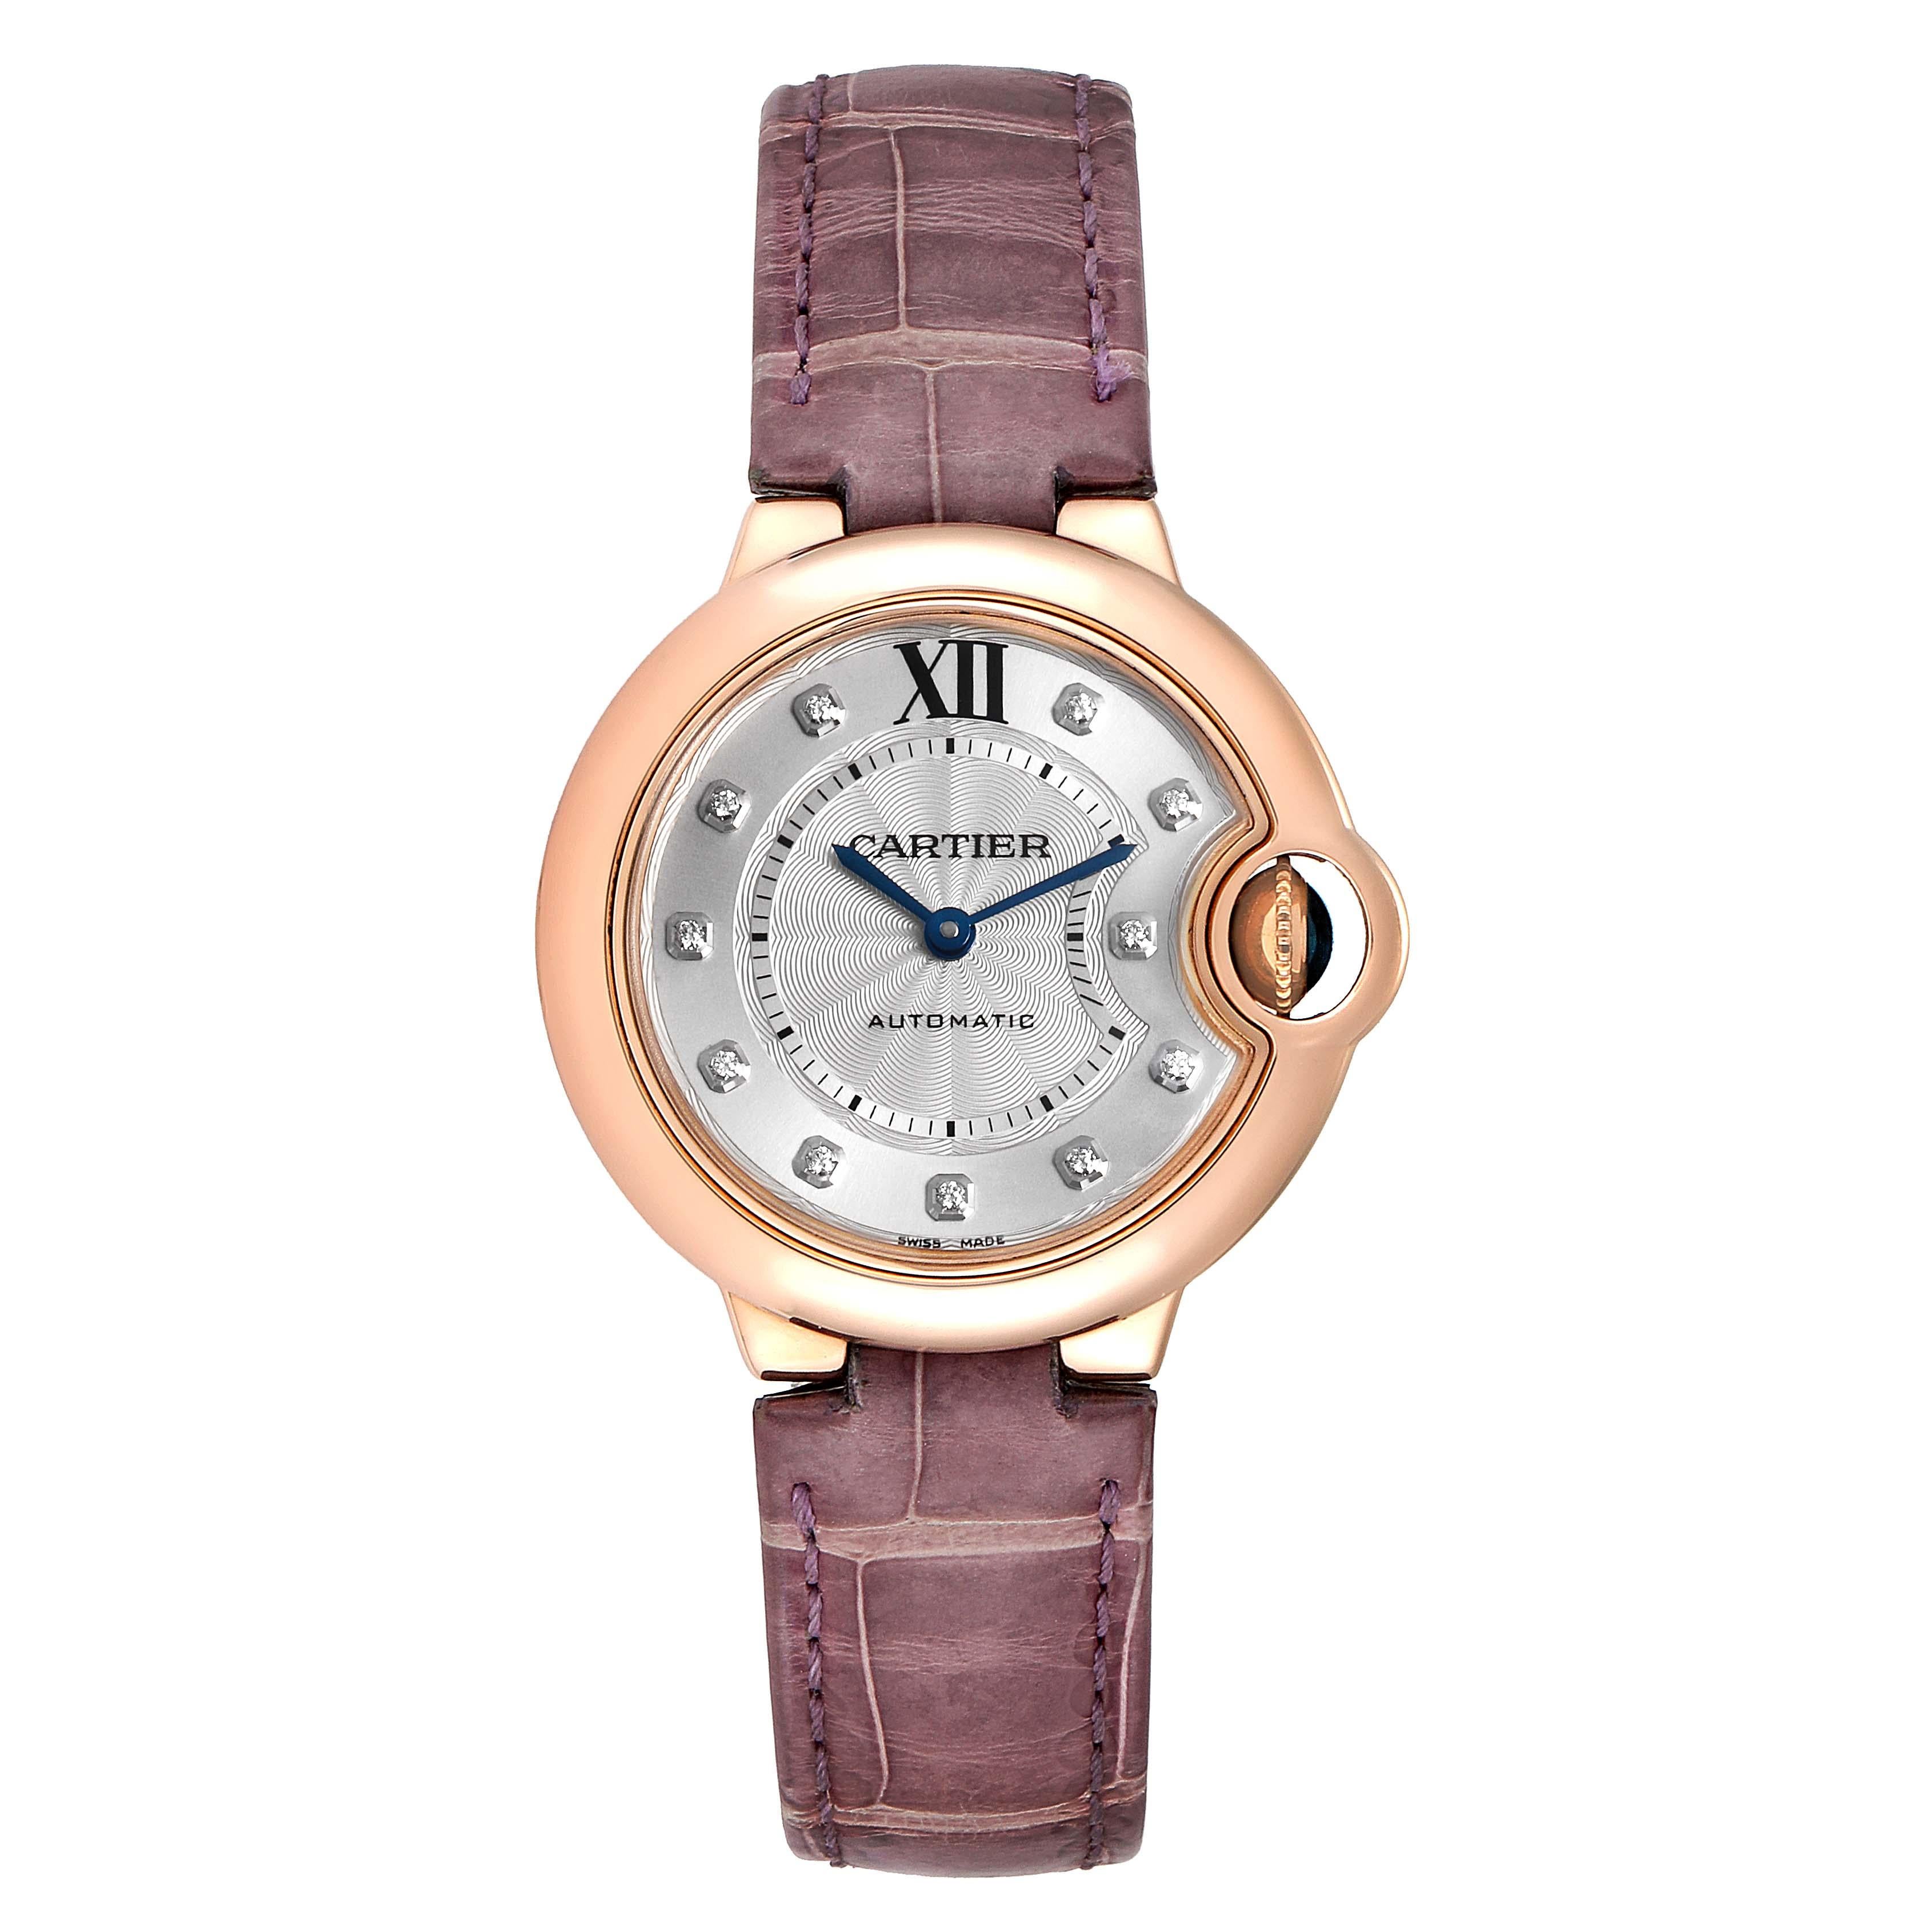 Cartier Ballon Bleu 33 Rose Gold Diamond Ladies Watch WE902063 Box Papers. Automatic self-winding movement. Caliber 076. Round 18K rose gold case 33mm in diameter. Fluted crown set with the blue sapphire cabochon. 18K rose gold smooth bezel. Scratch